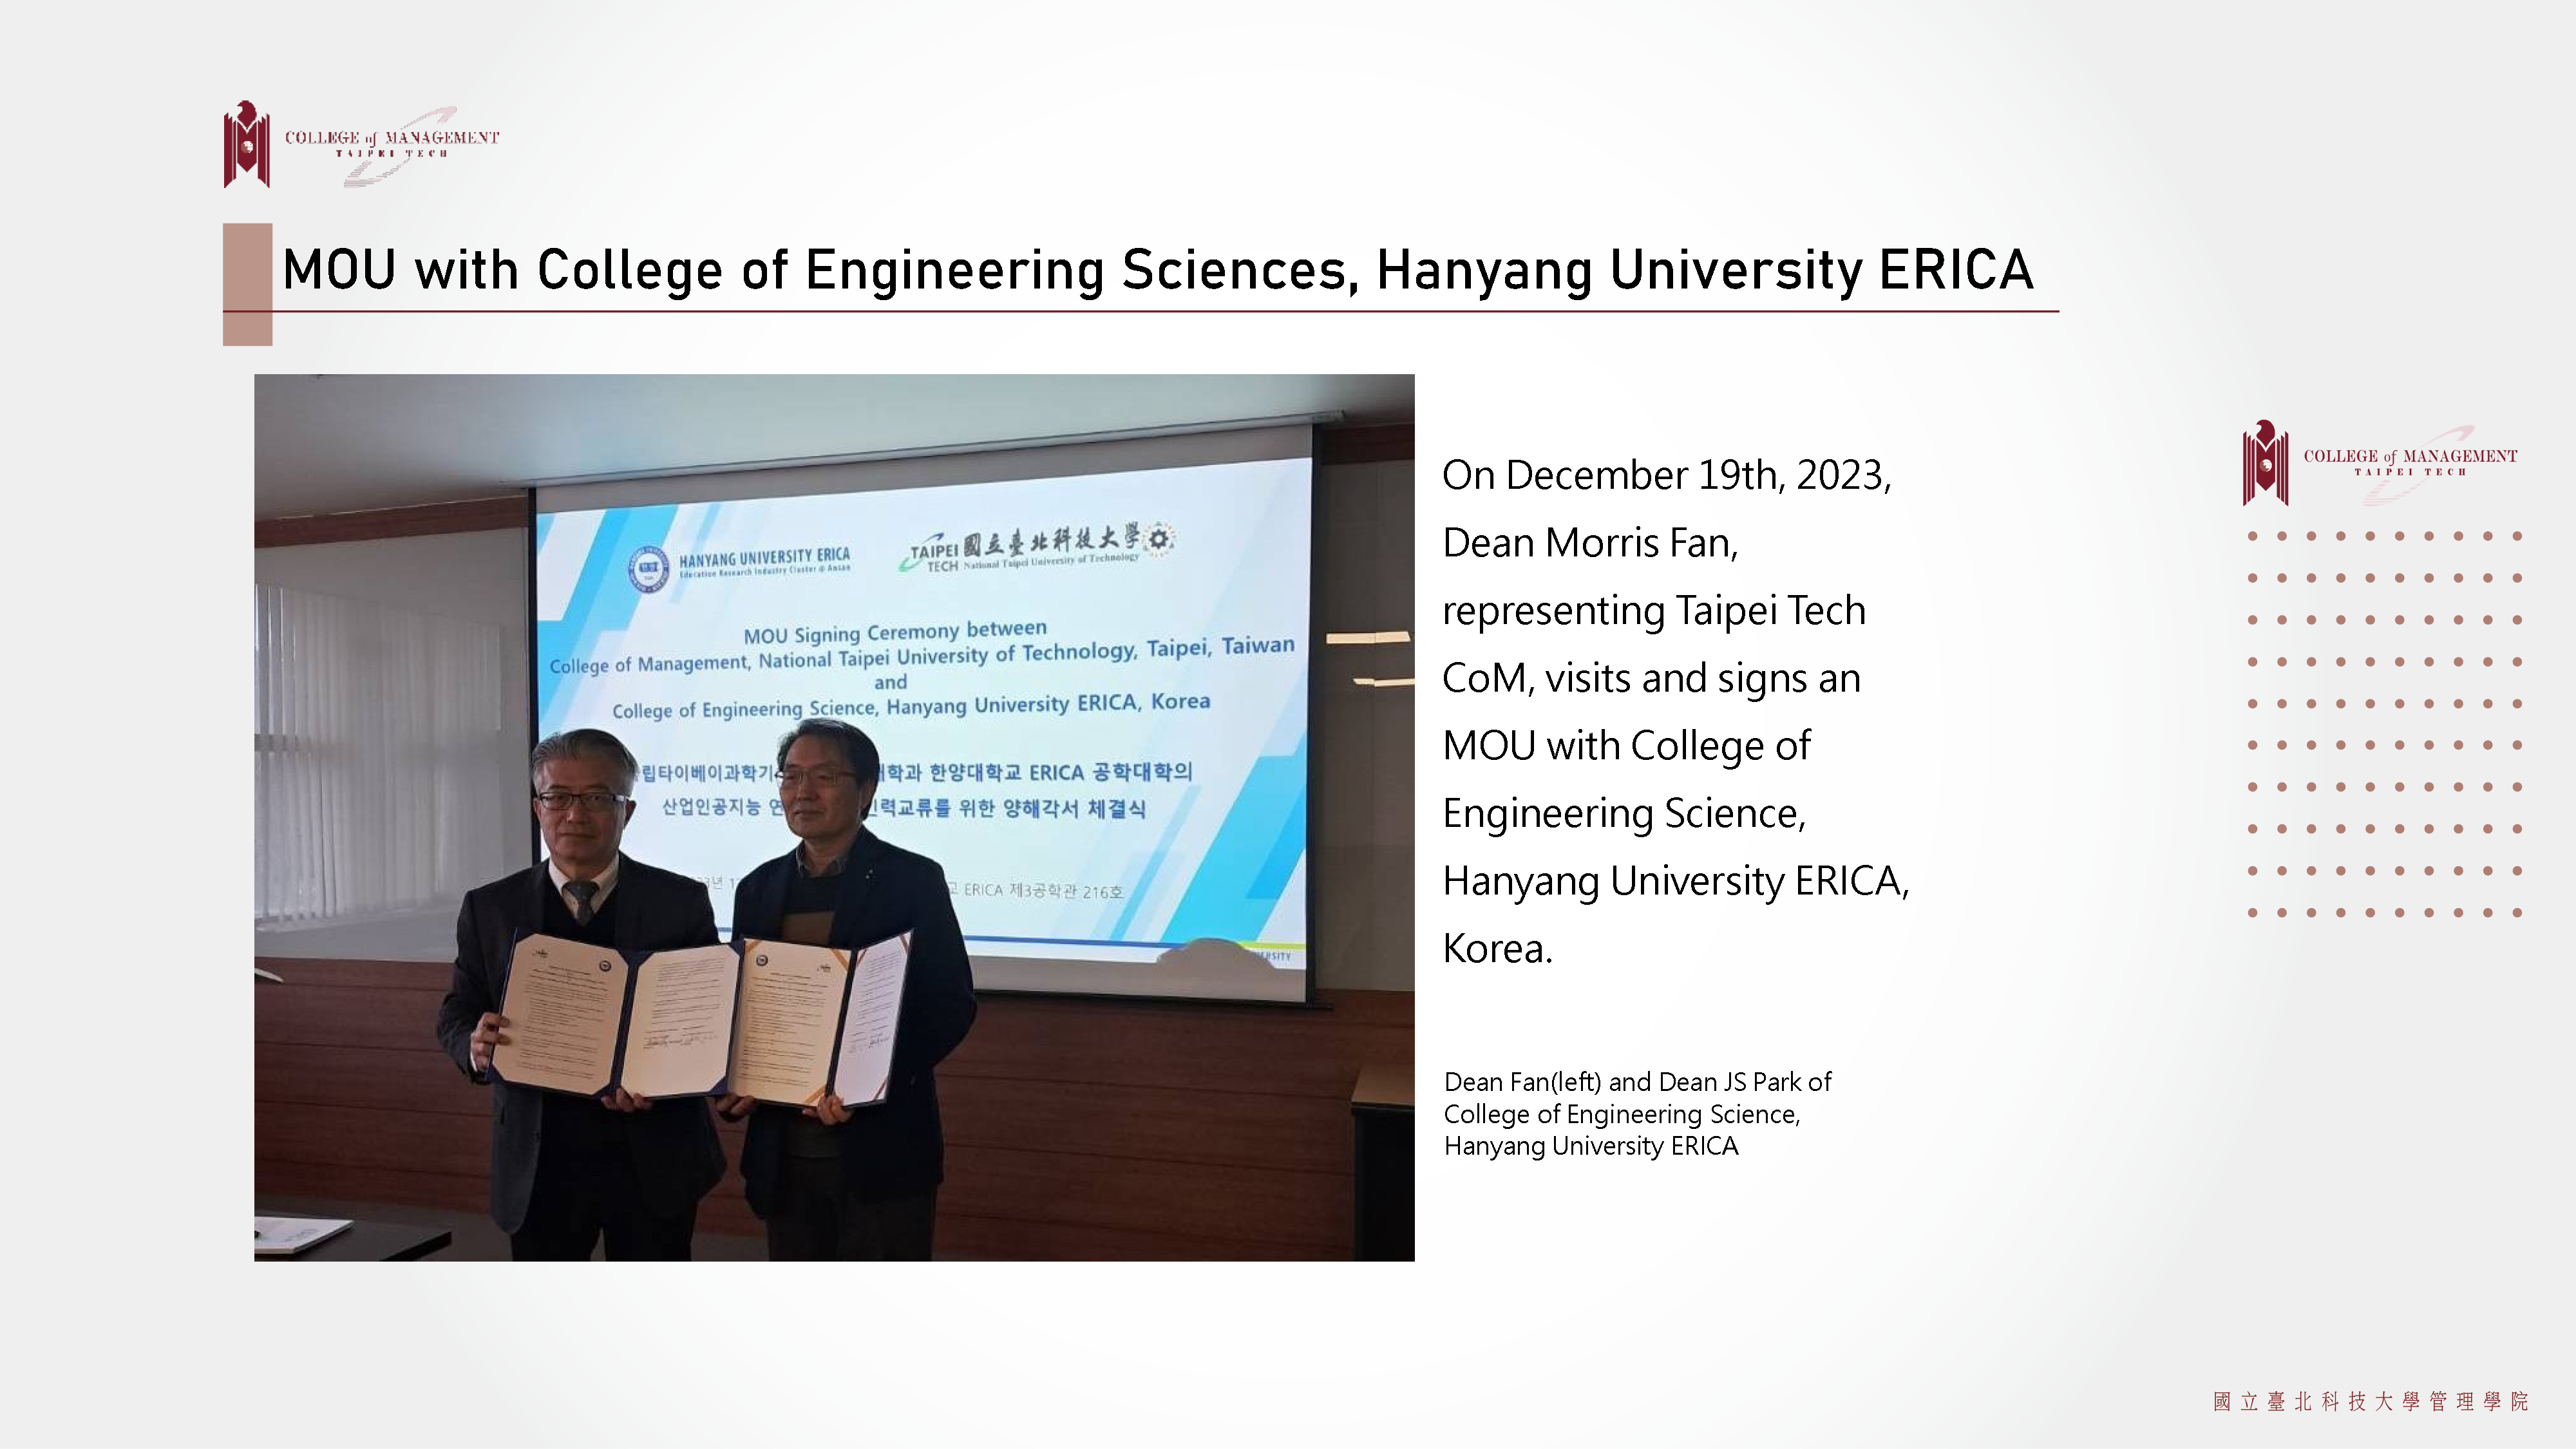 MOU with College of Engineering Sciences, Hanyang University ERICA